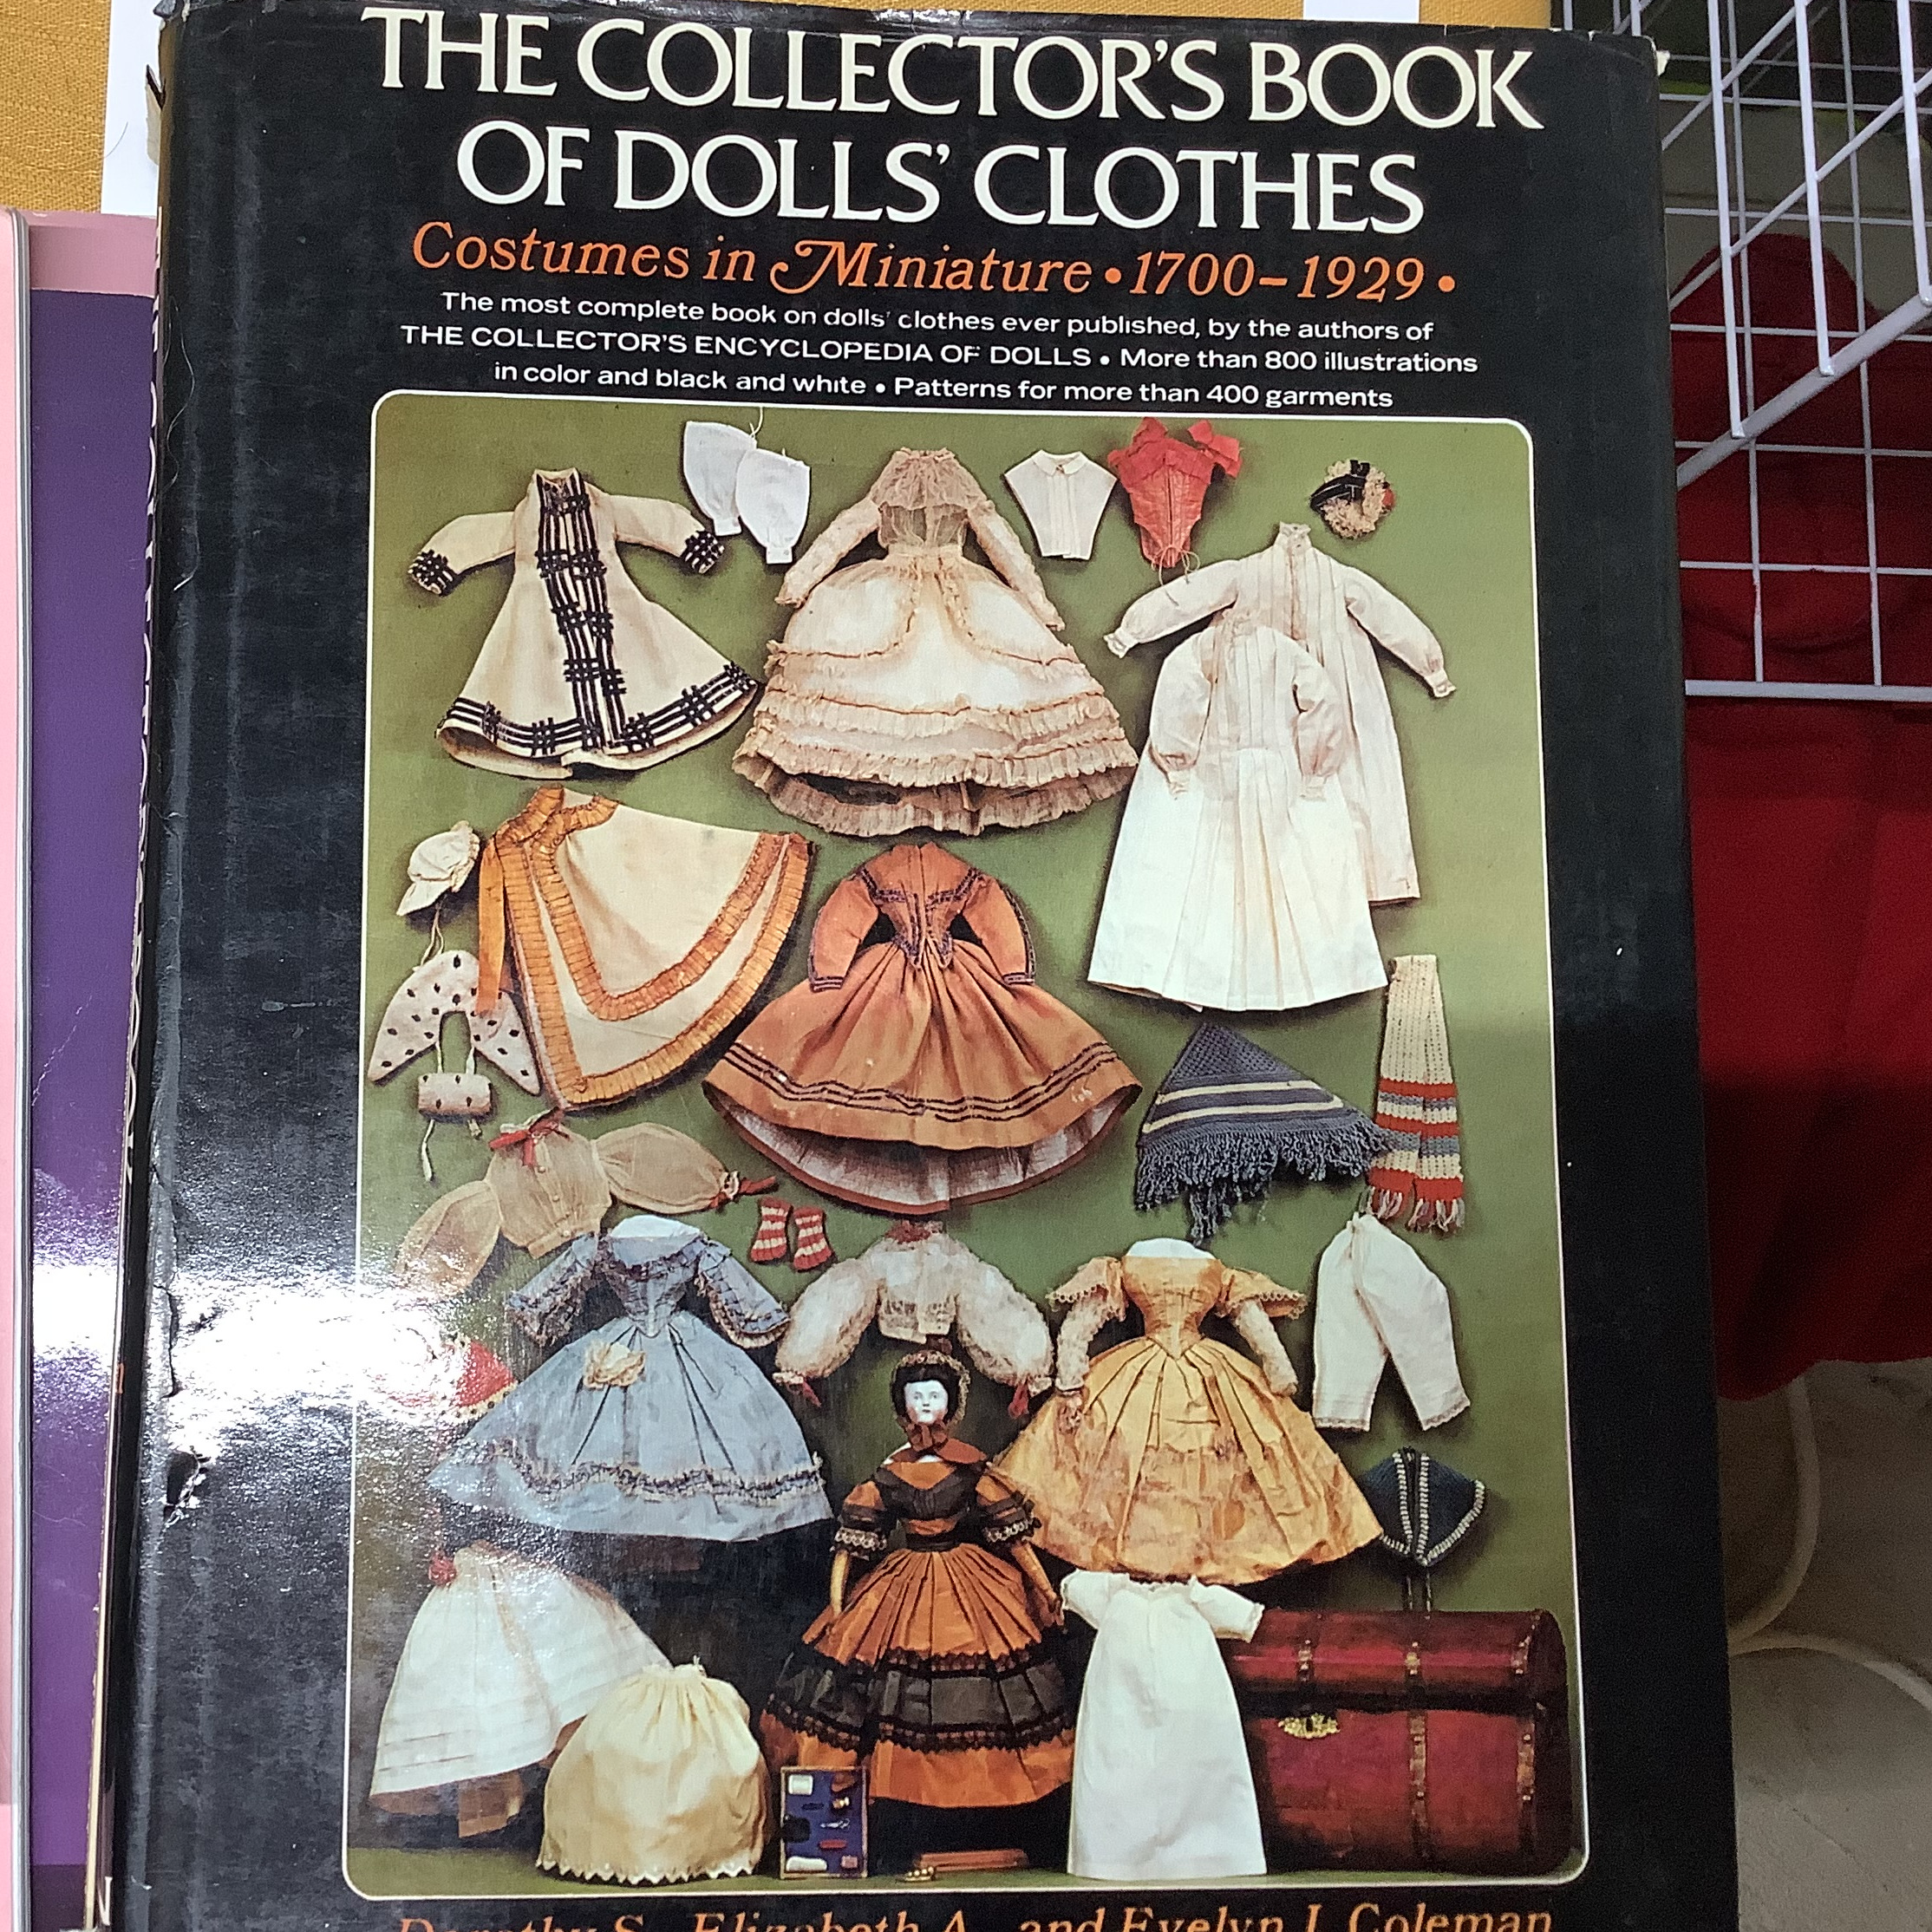 Hardcover book depicting antique doll dresses in upperclass styles